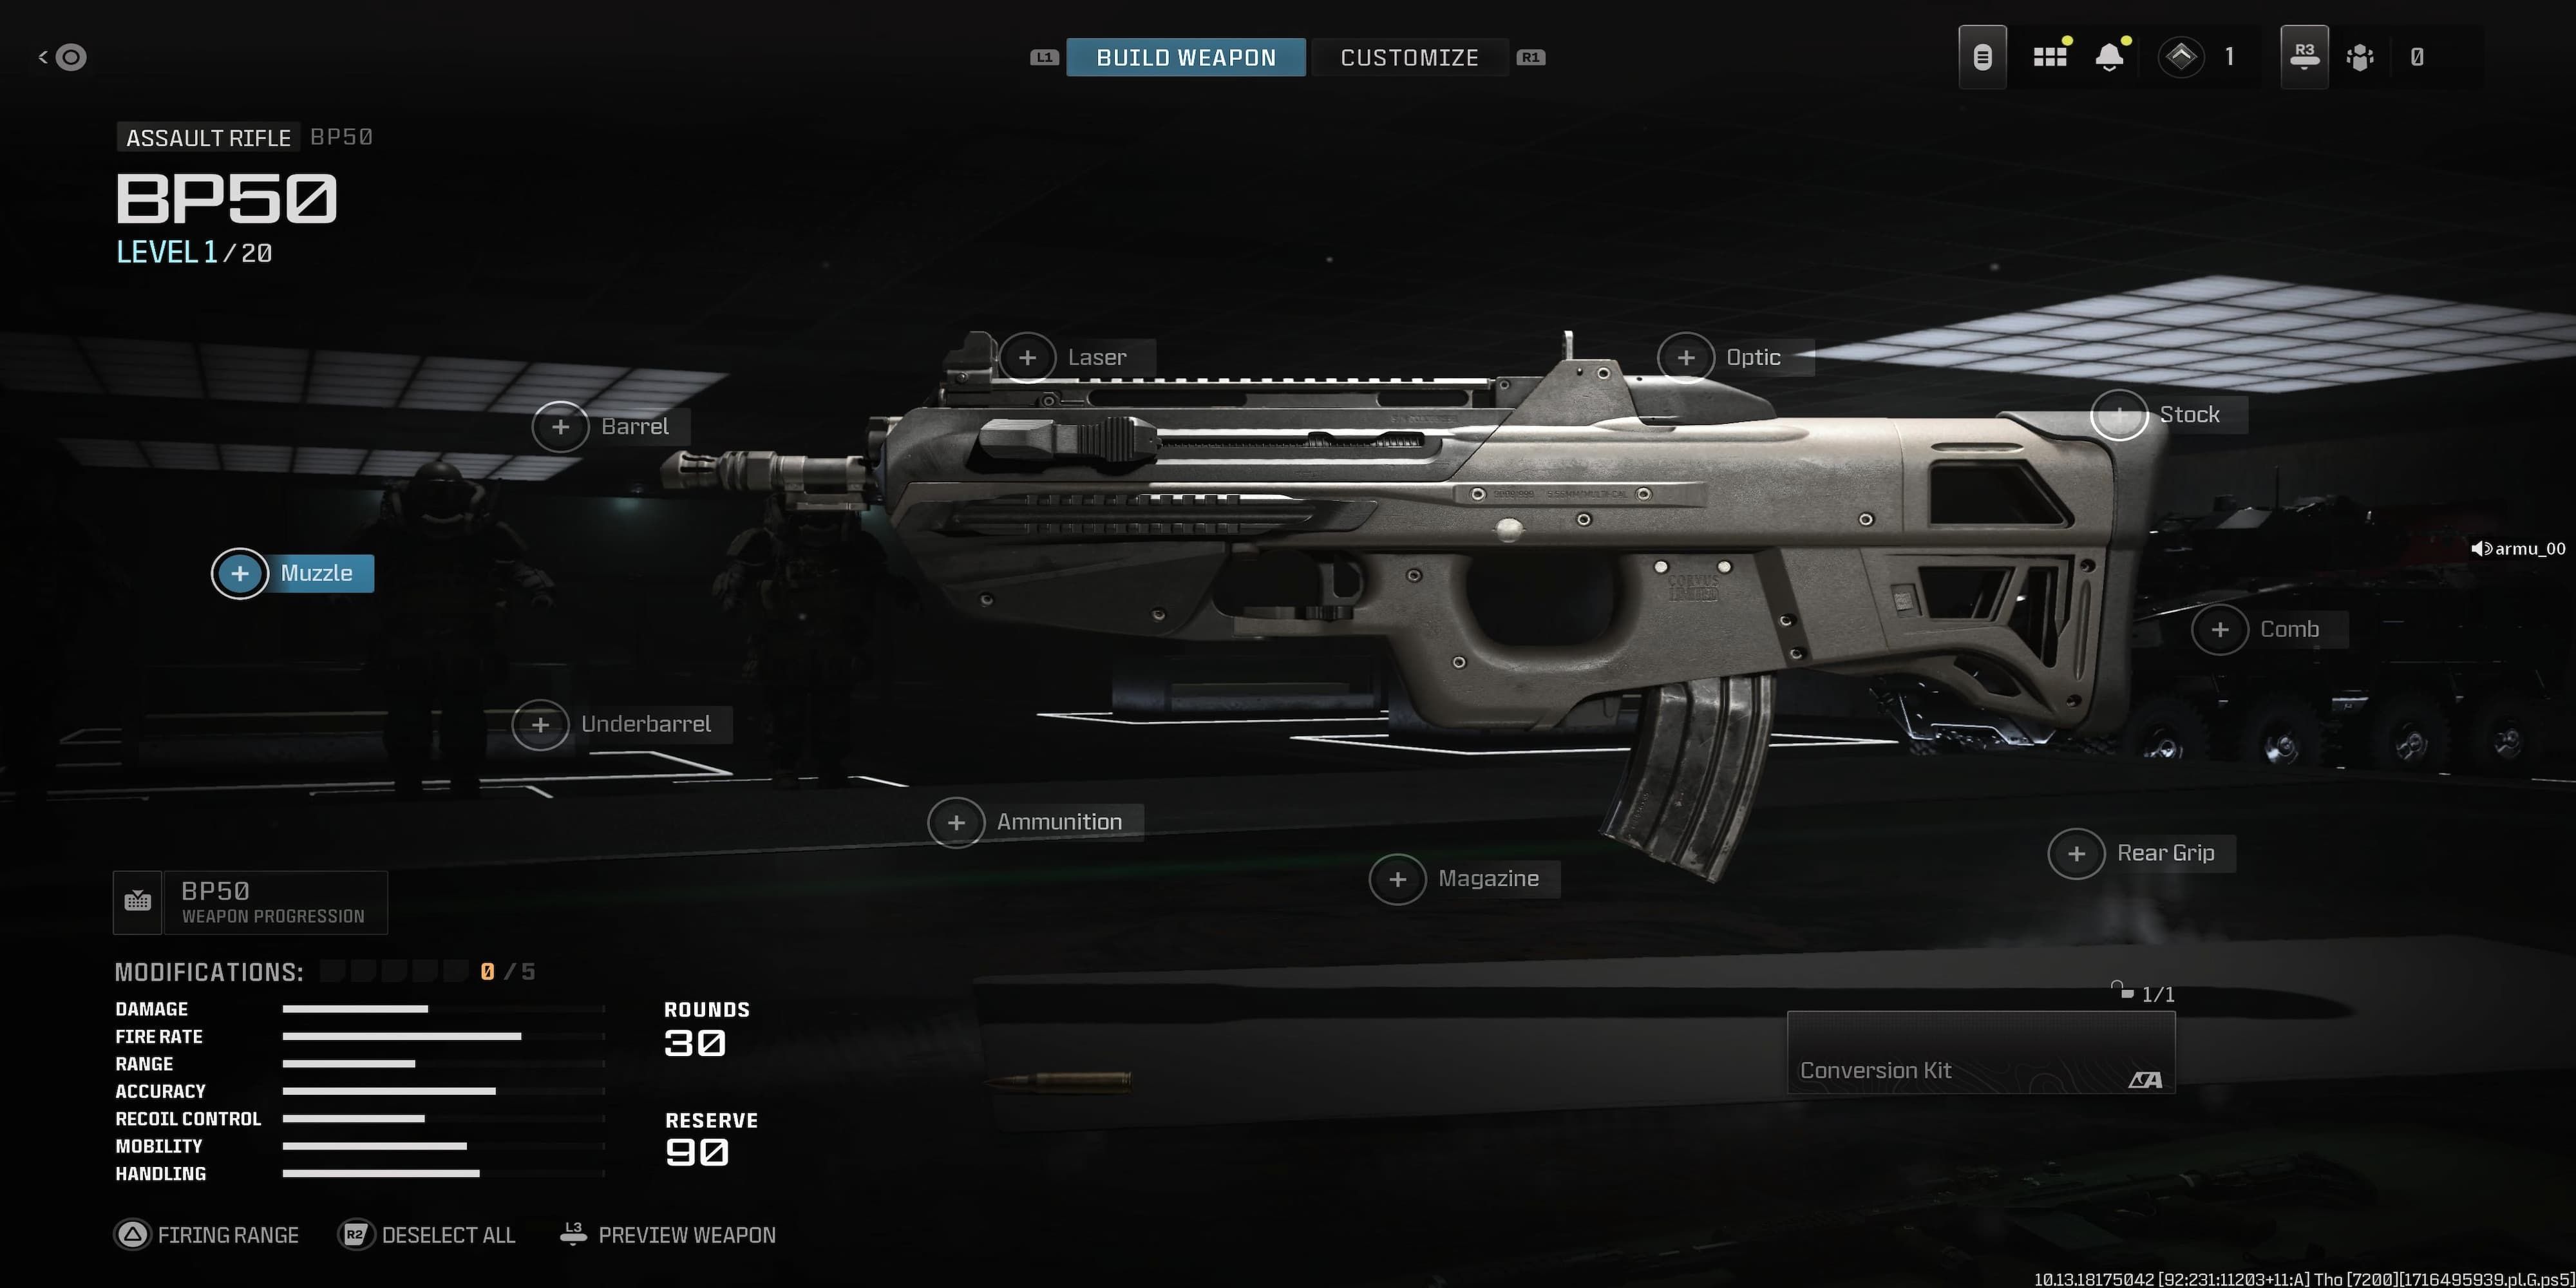 The BP50 in Call of Duty Warzone and Modern Warfare 3